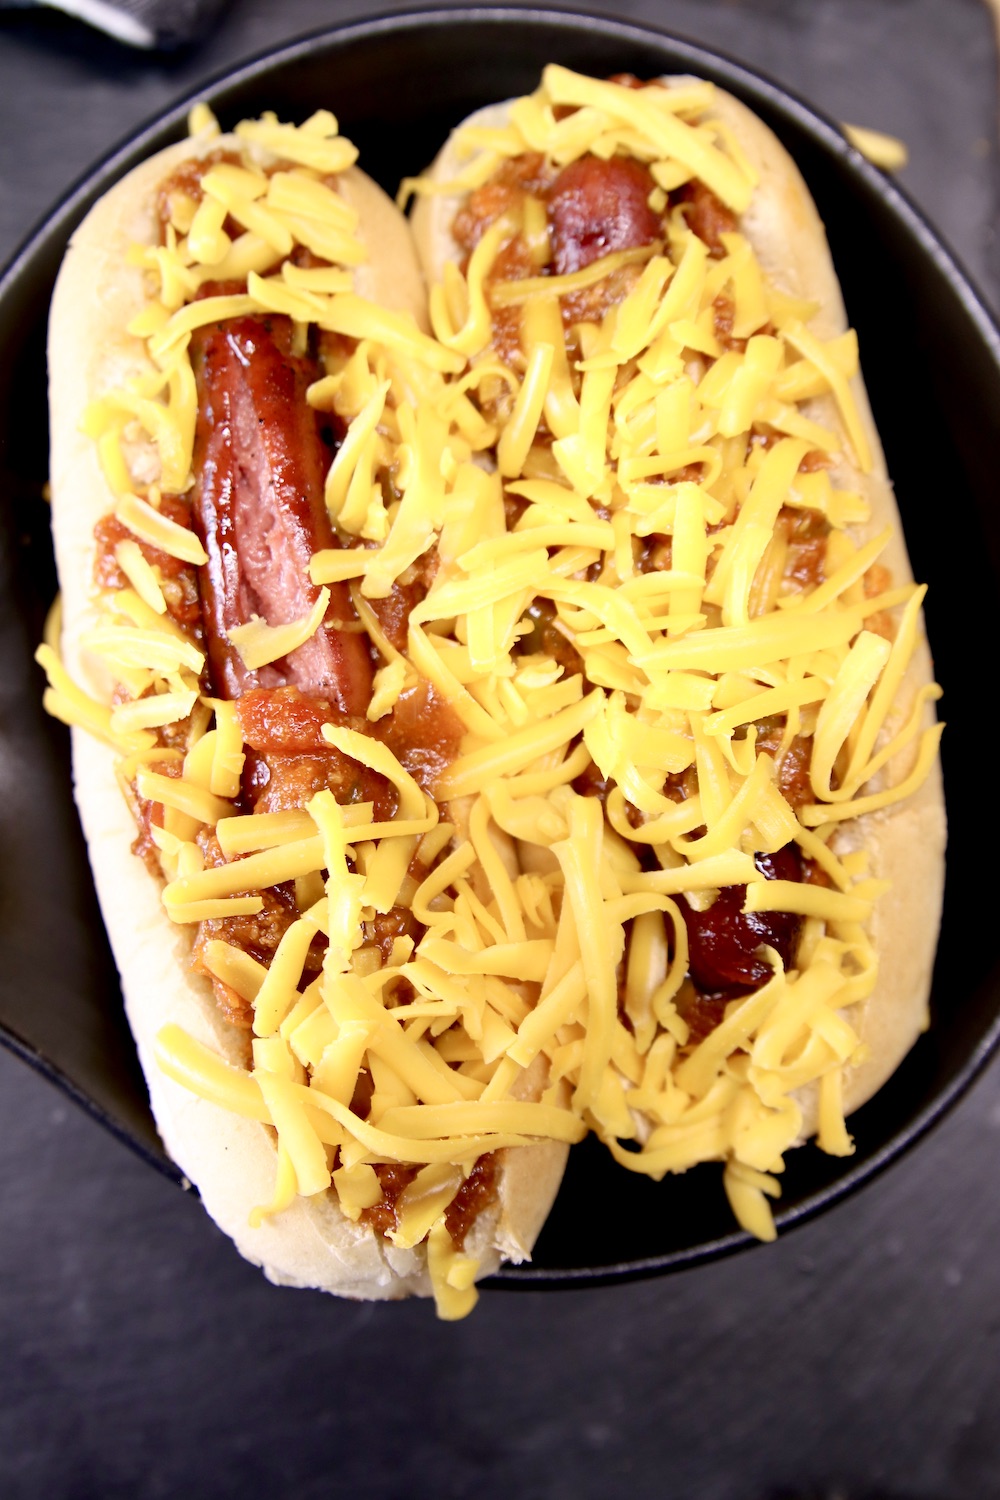 2 Cheese topped chili dogs